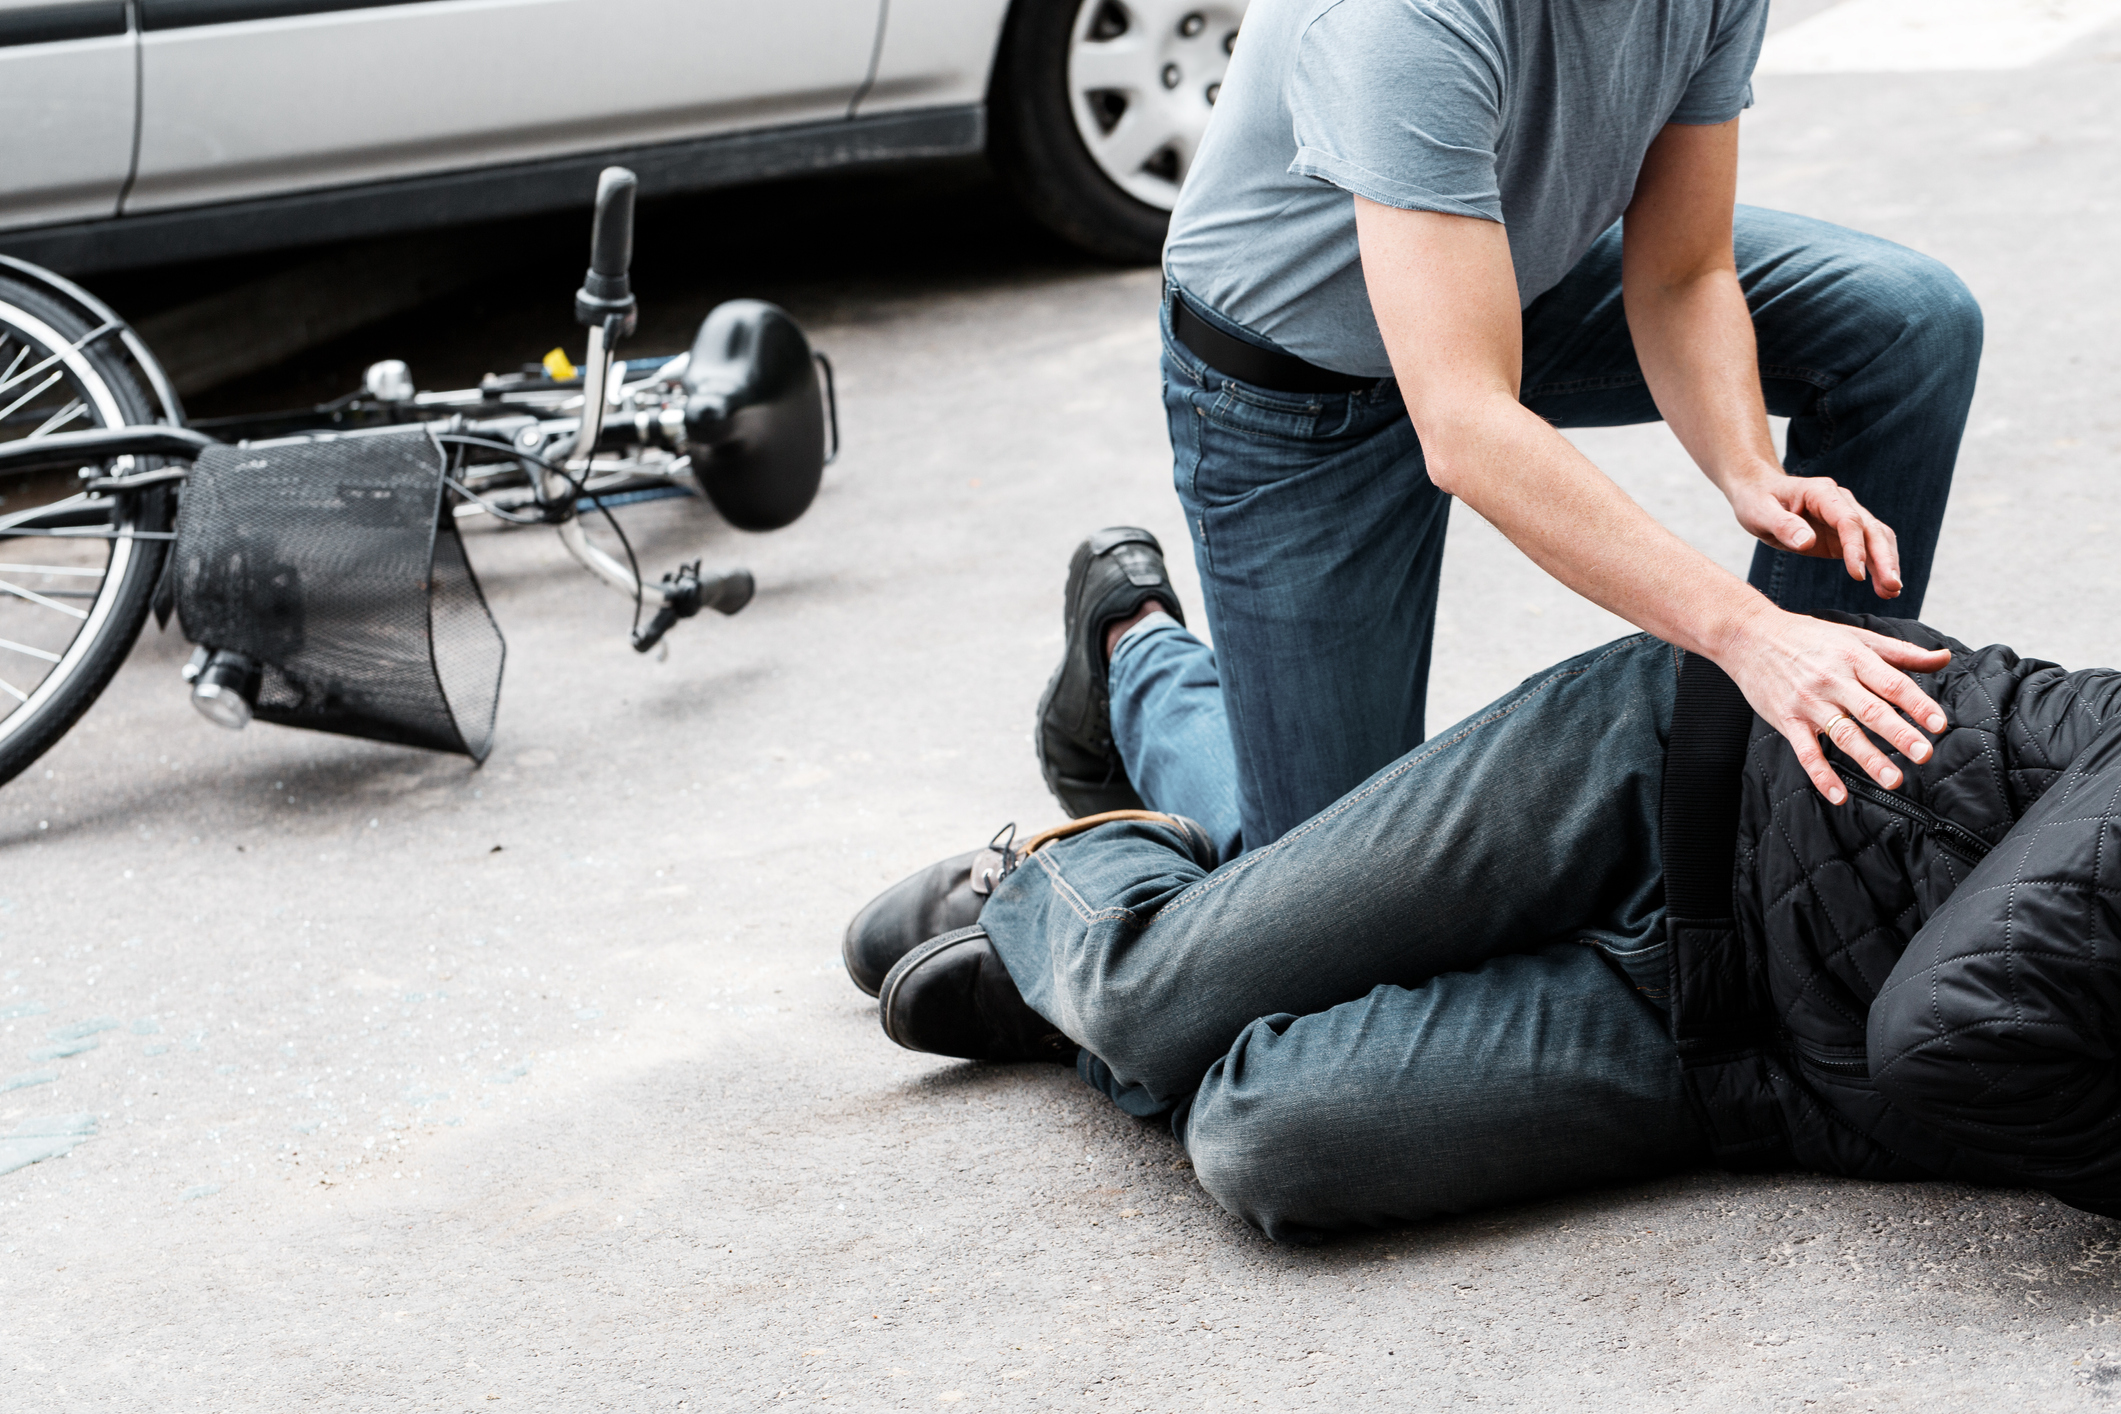 A pedestrian helps an injured man after a bicycle accident, then calls an Atlanta bicycle accident lawyer.